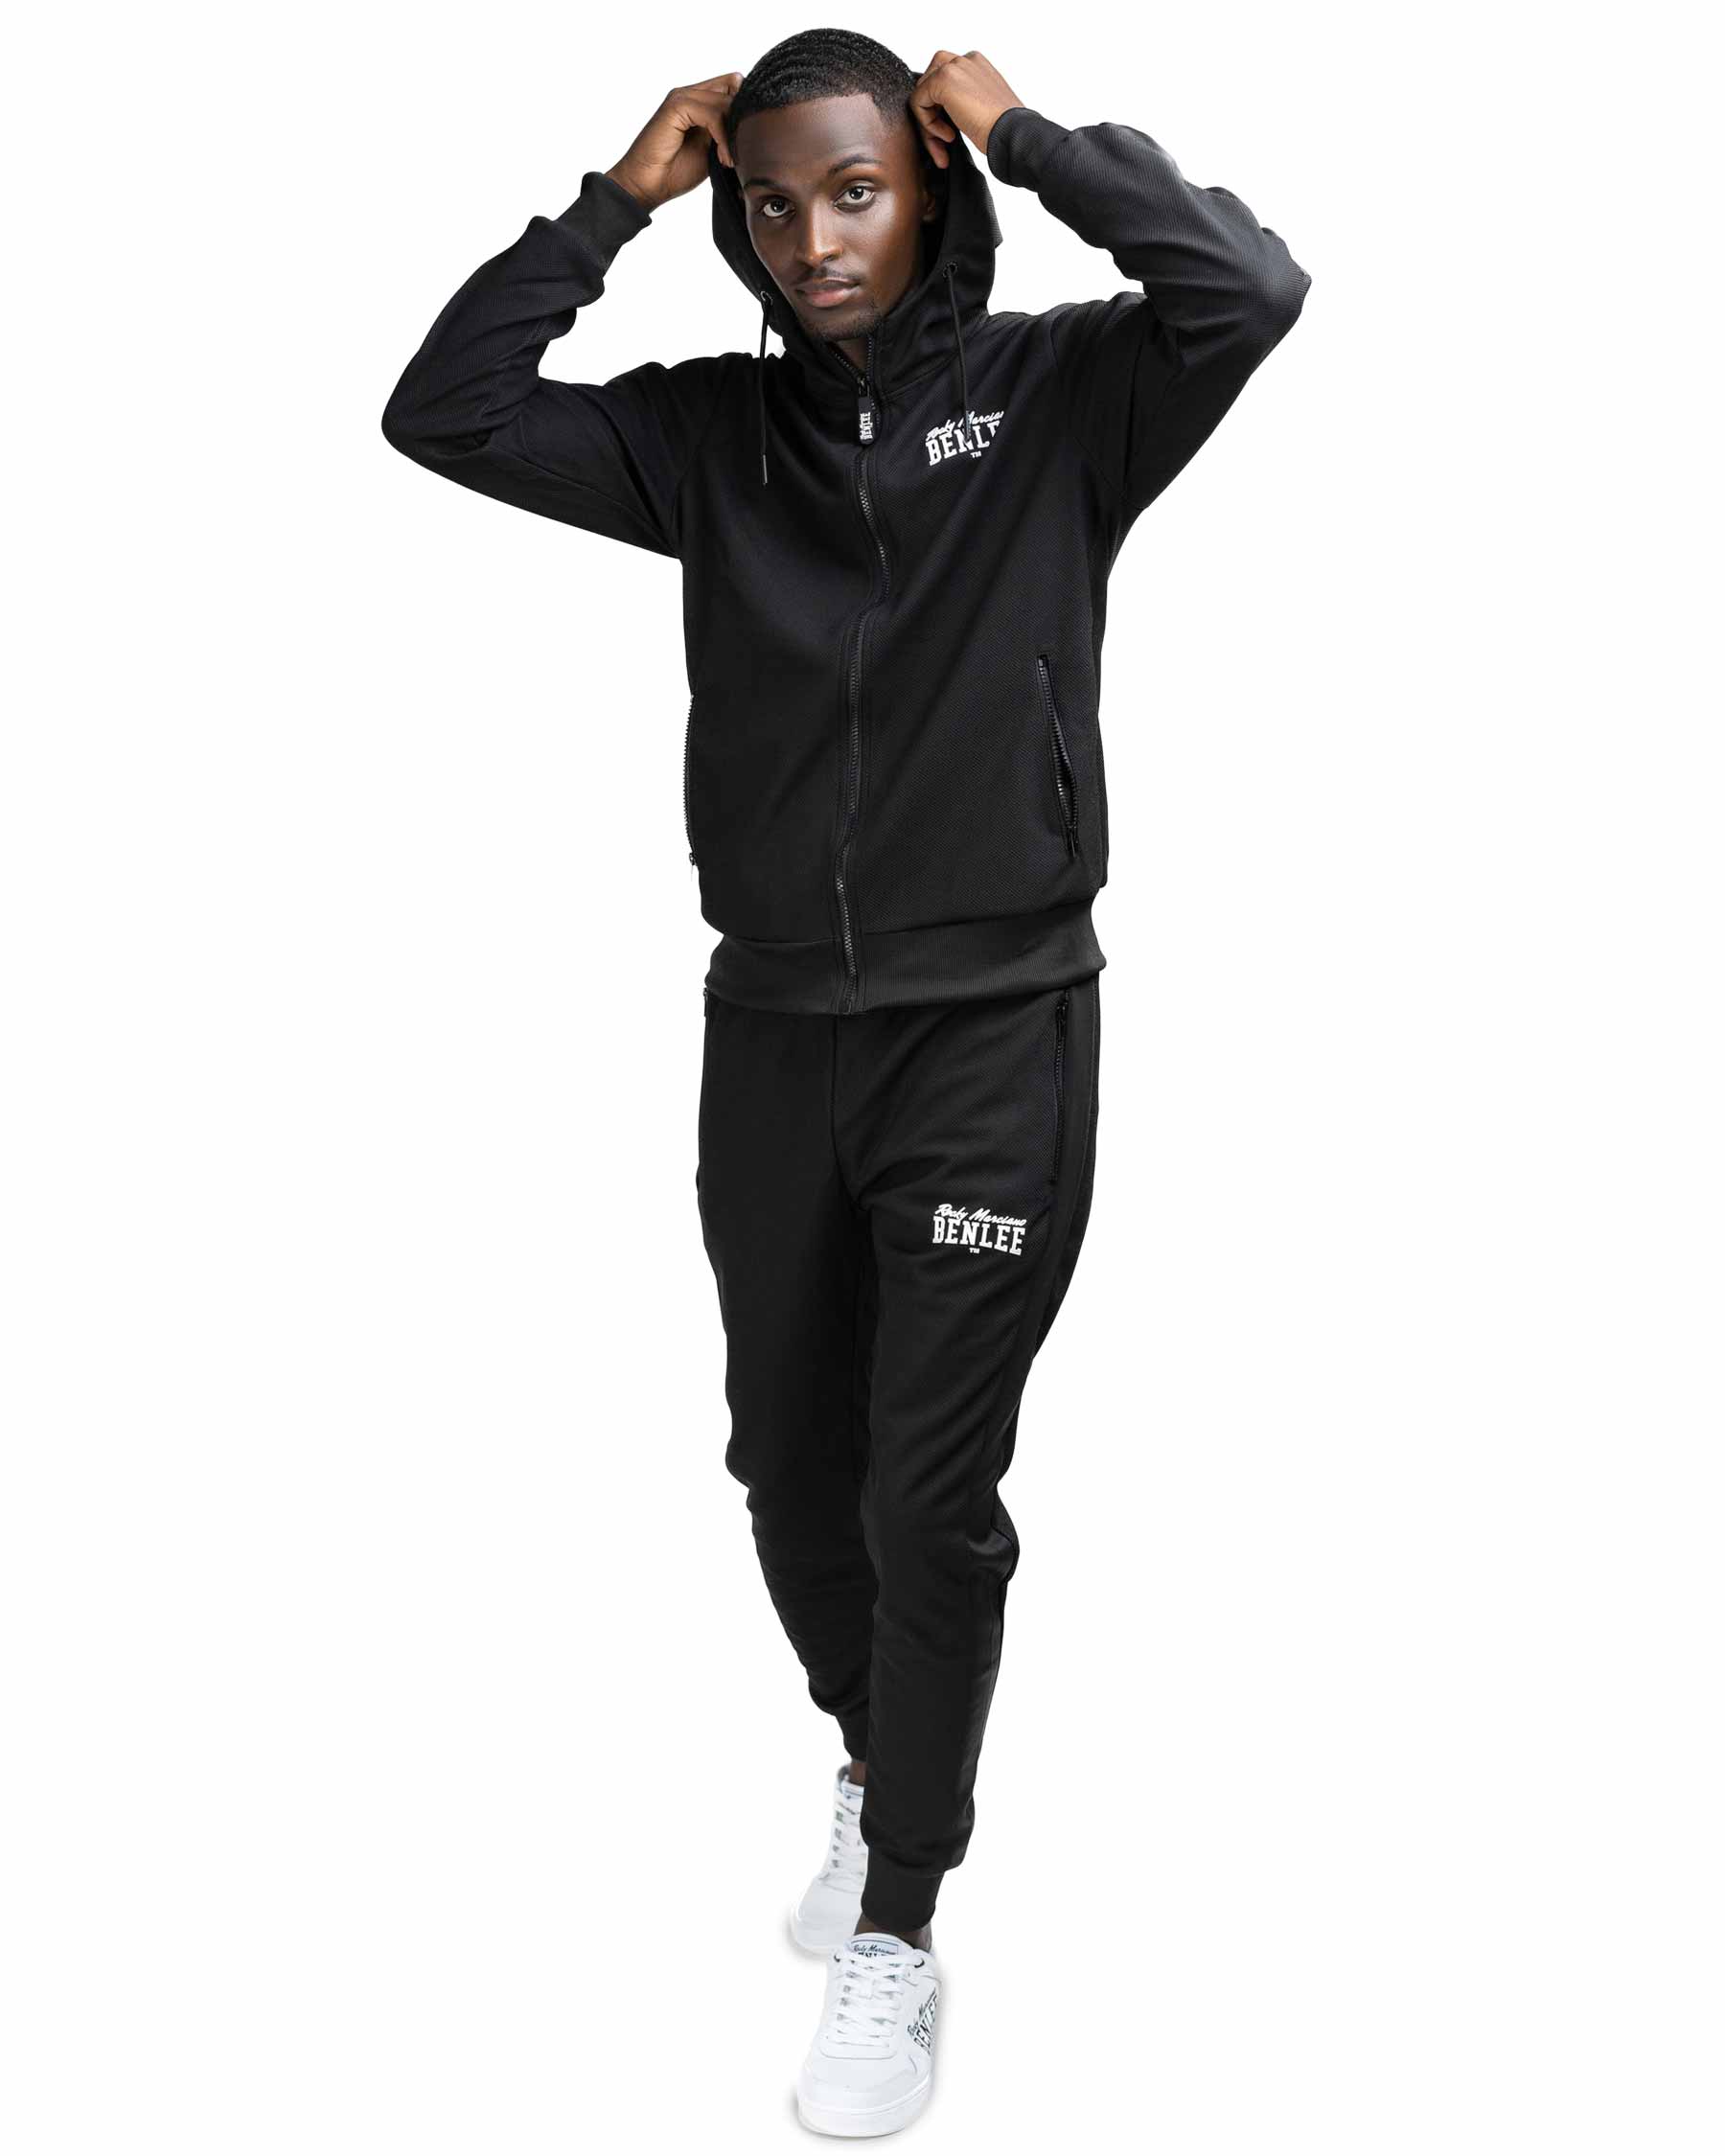 BenLee traningsuit Hackberry - Tracksuits - BenLee boxing equipment and  sportswear